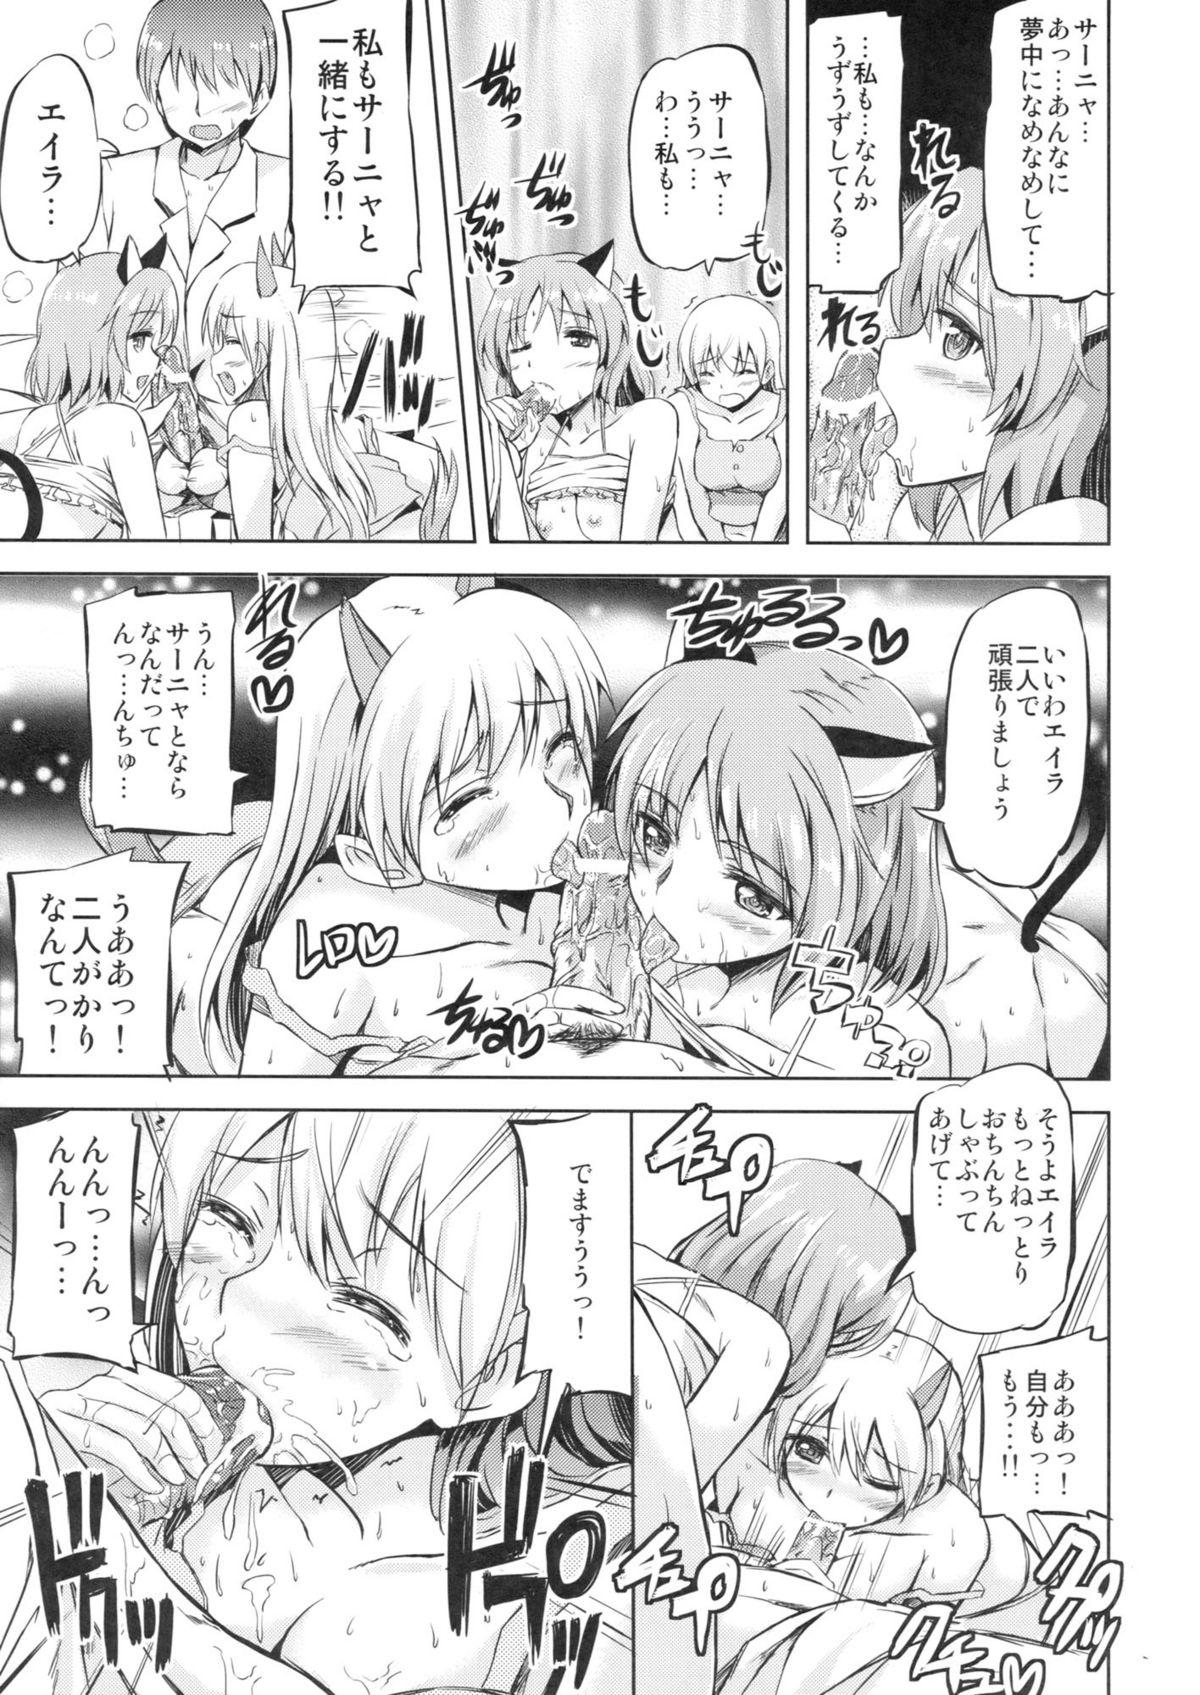 Porno 18 Delicious Witches! - Strike witches Eat - Page 11